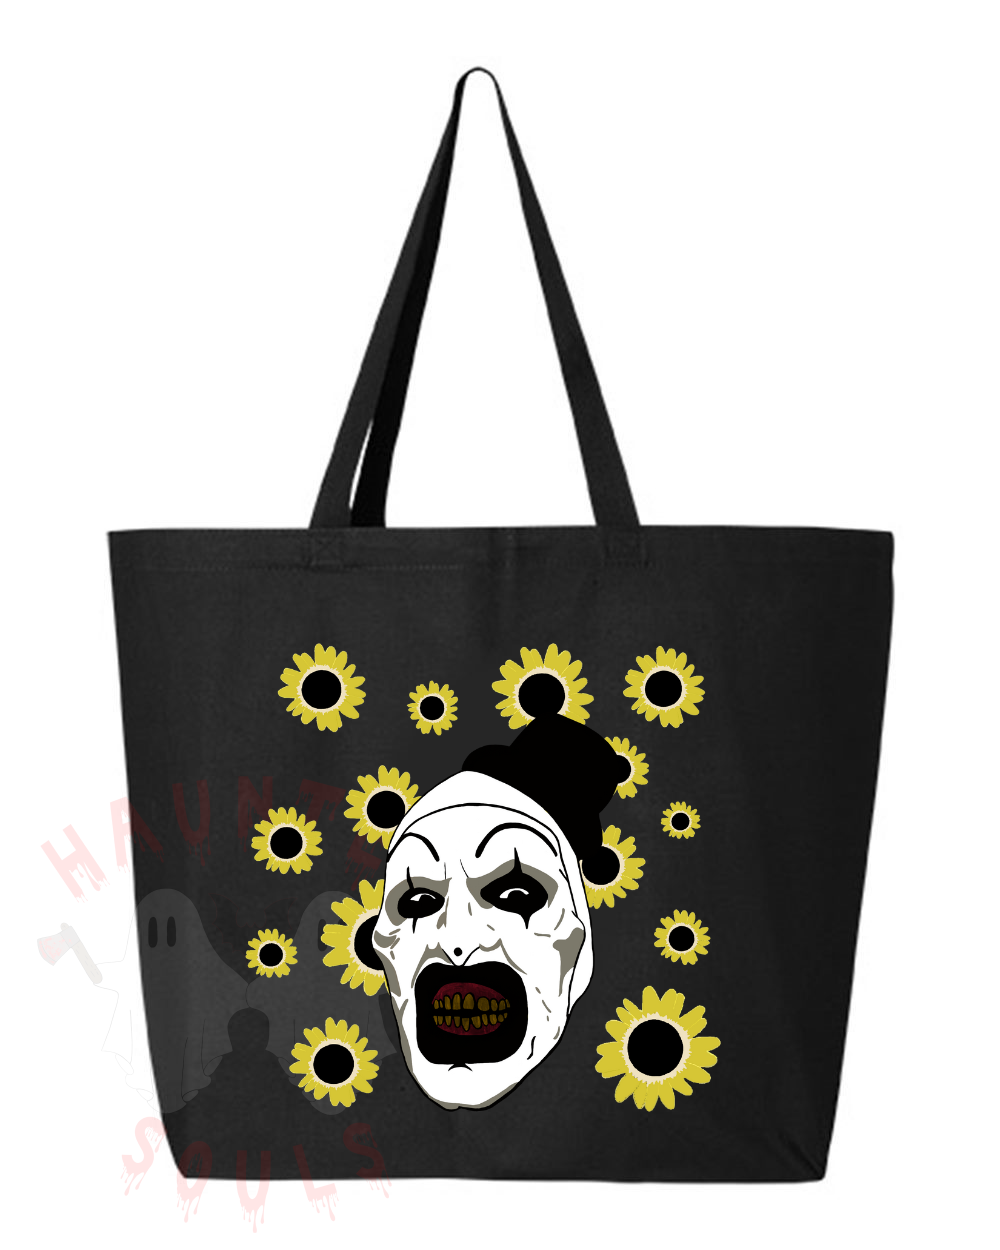 Art the Clown Inspired Canvas Tote